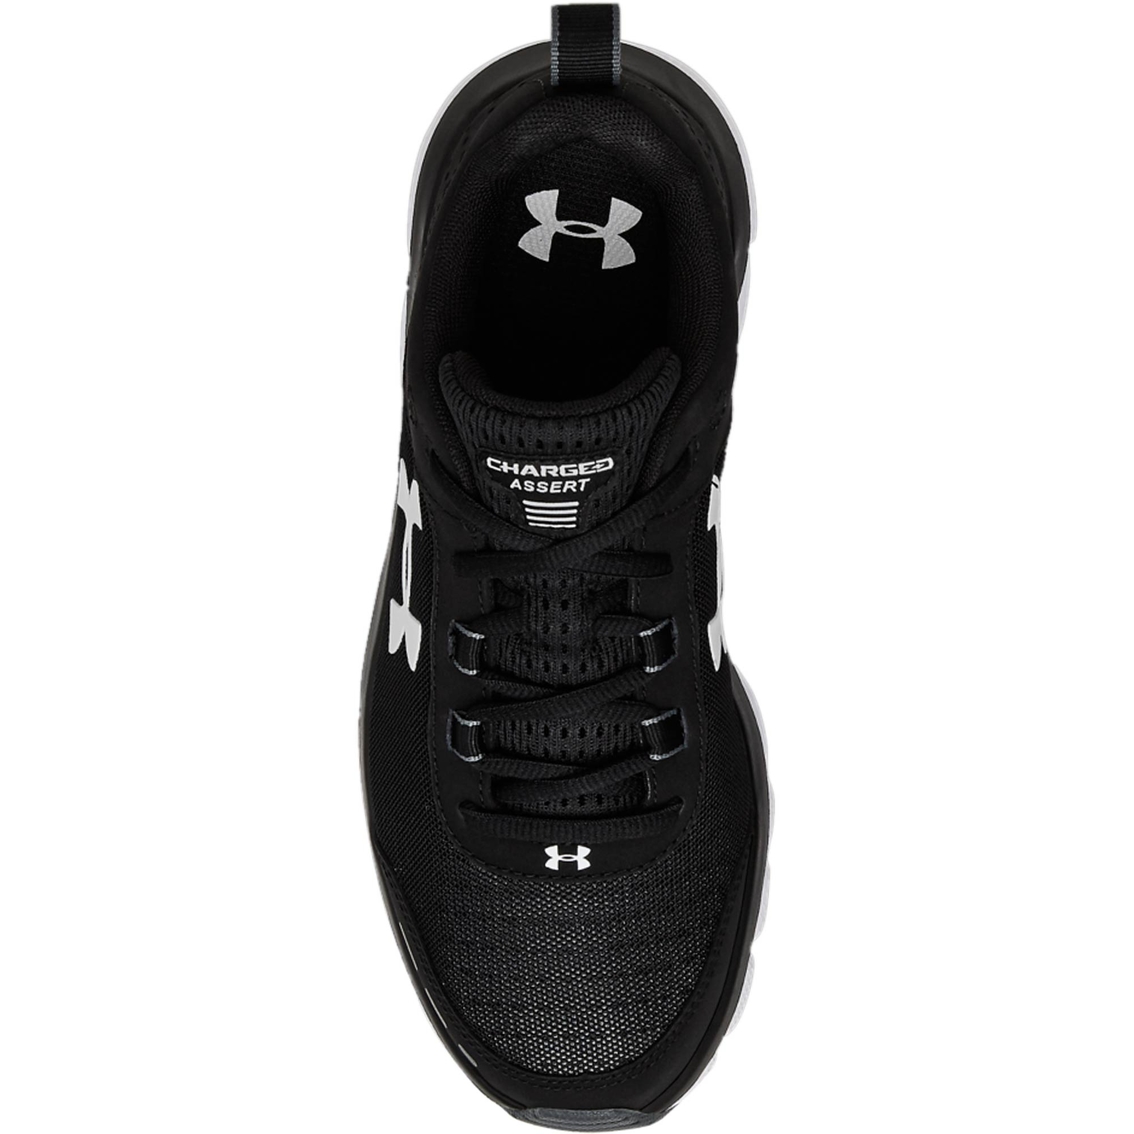 Under Armour Women's Charged Assert Running Shoes - Image 4 of 5